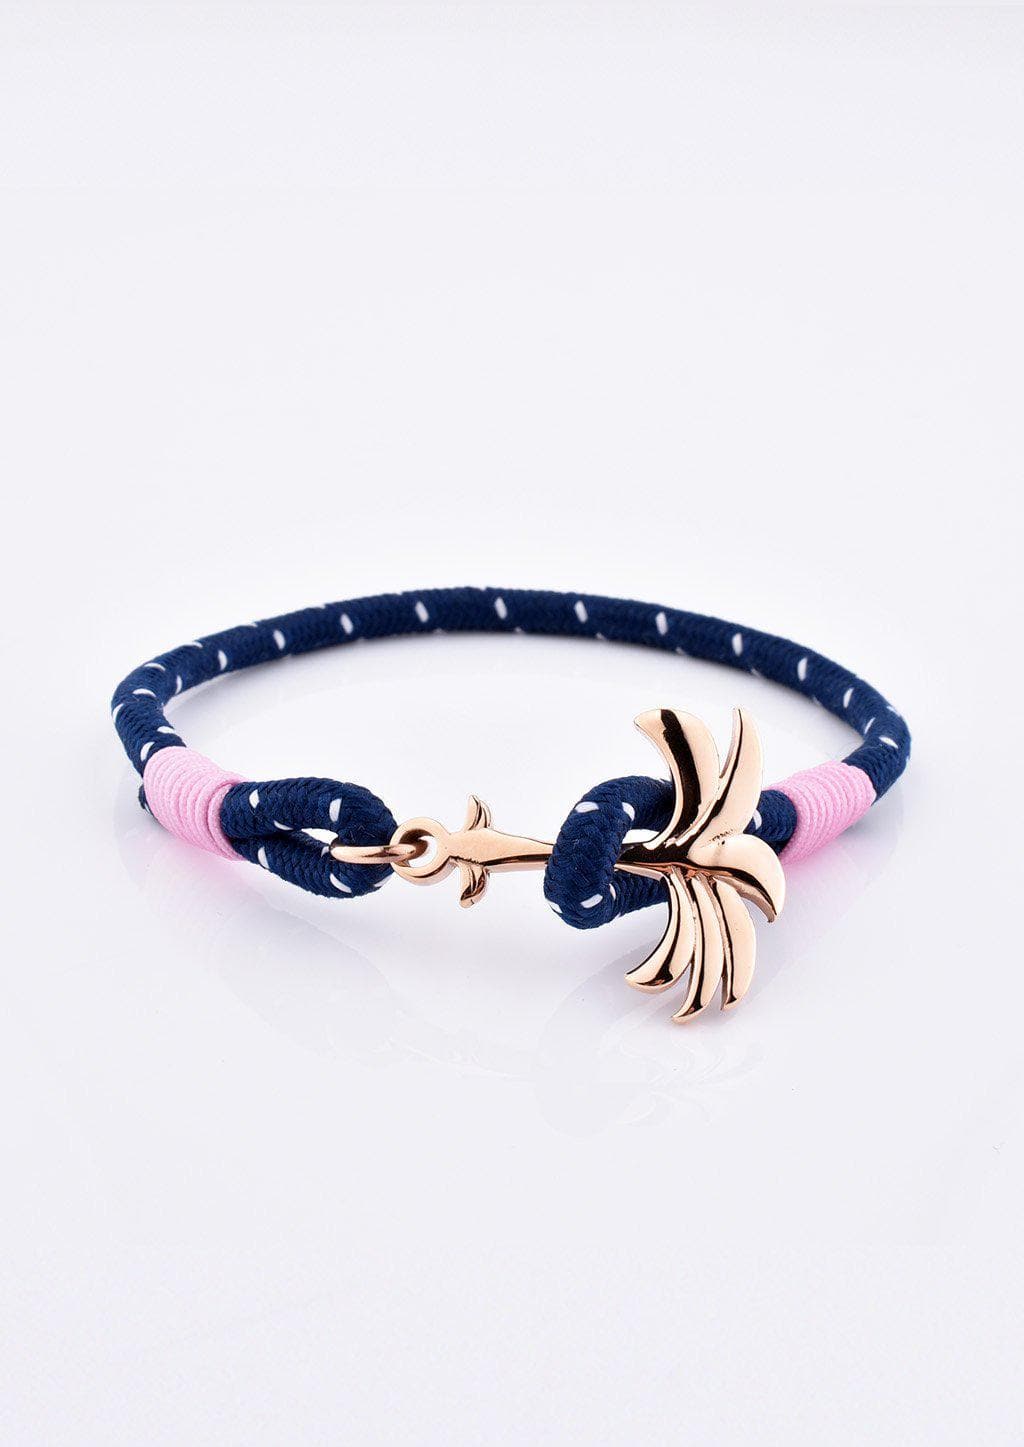 Daybreak - Single - Season two Palm anchor bracelet with pink and blue nylon band.